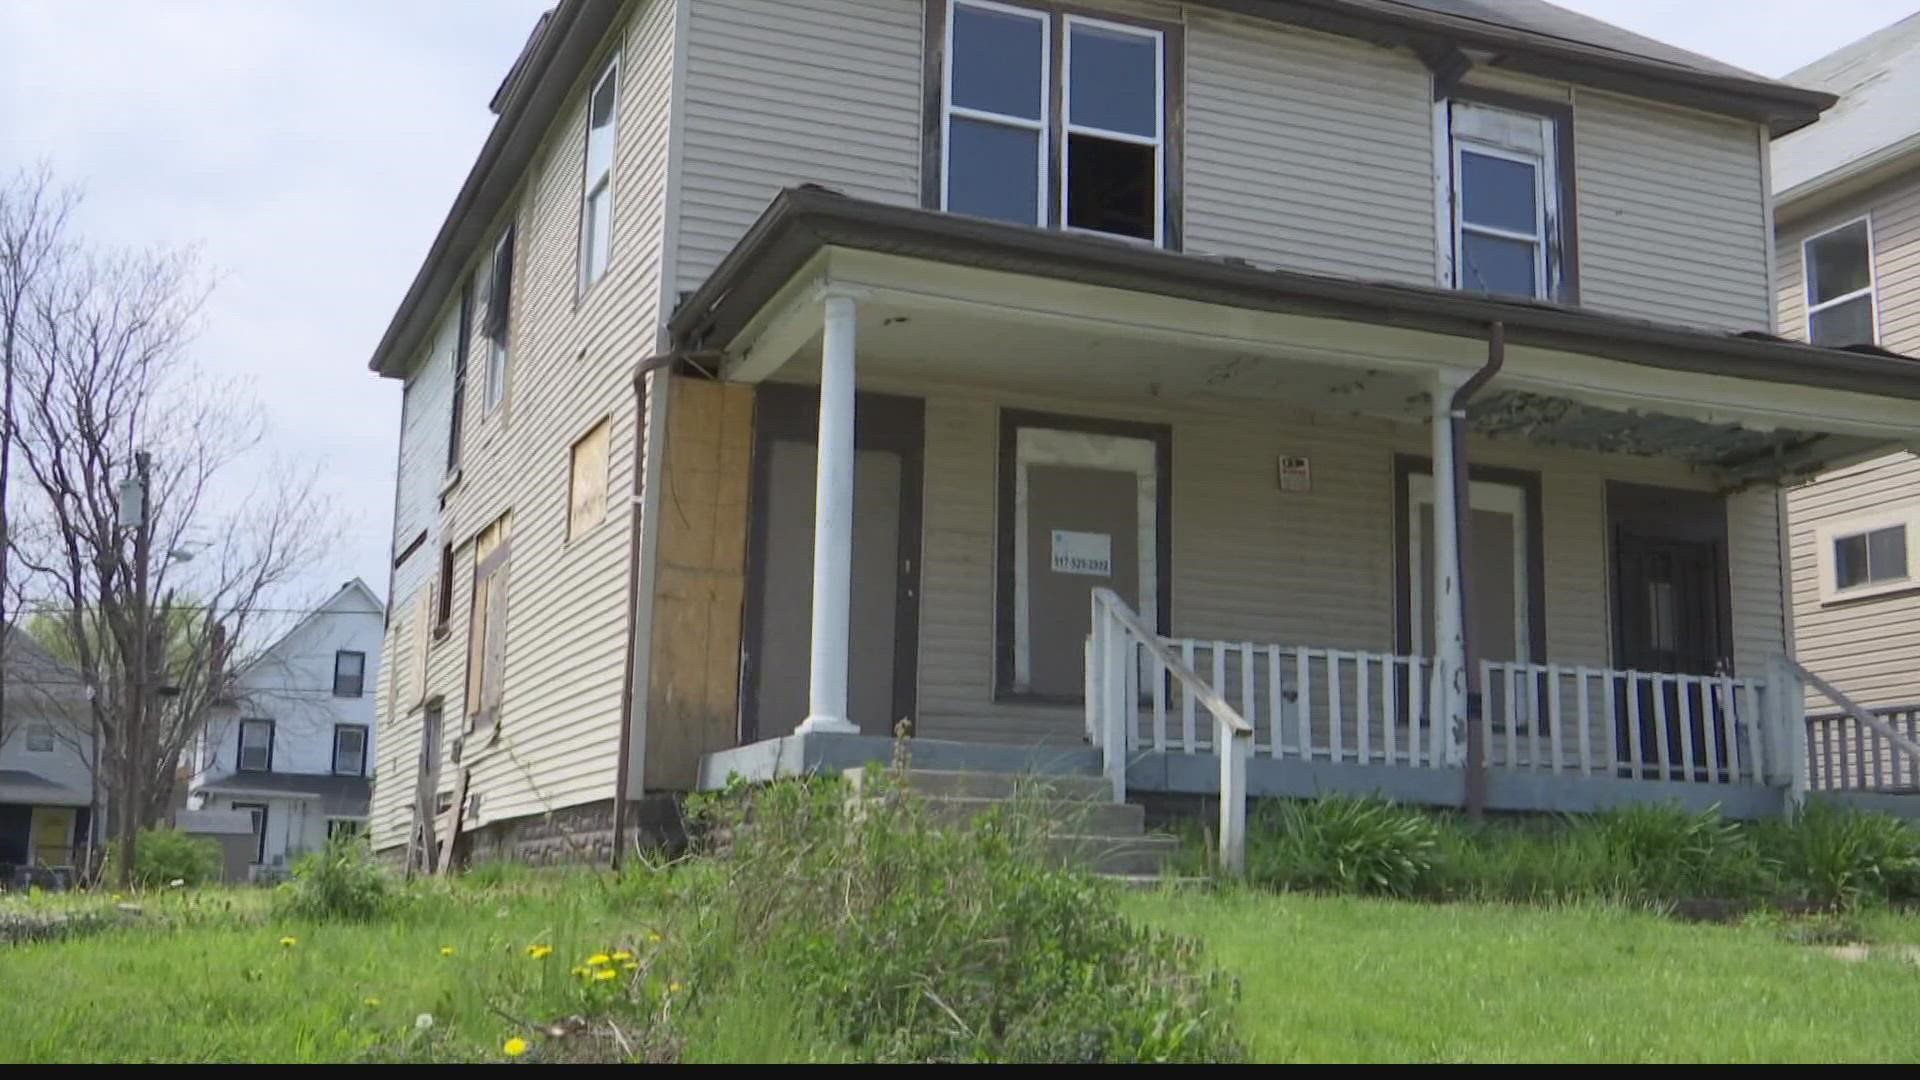 Indianapolis is taking a big step to combat the housing crisis across the city.